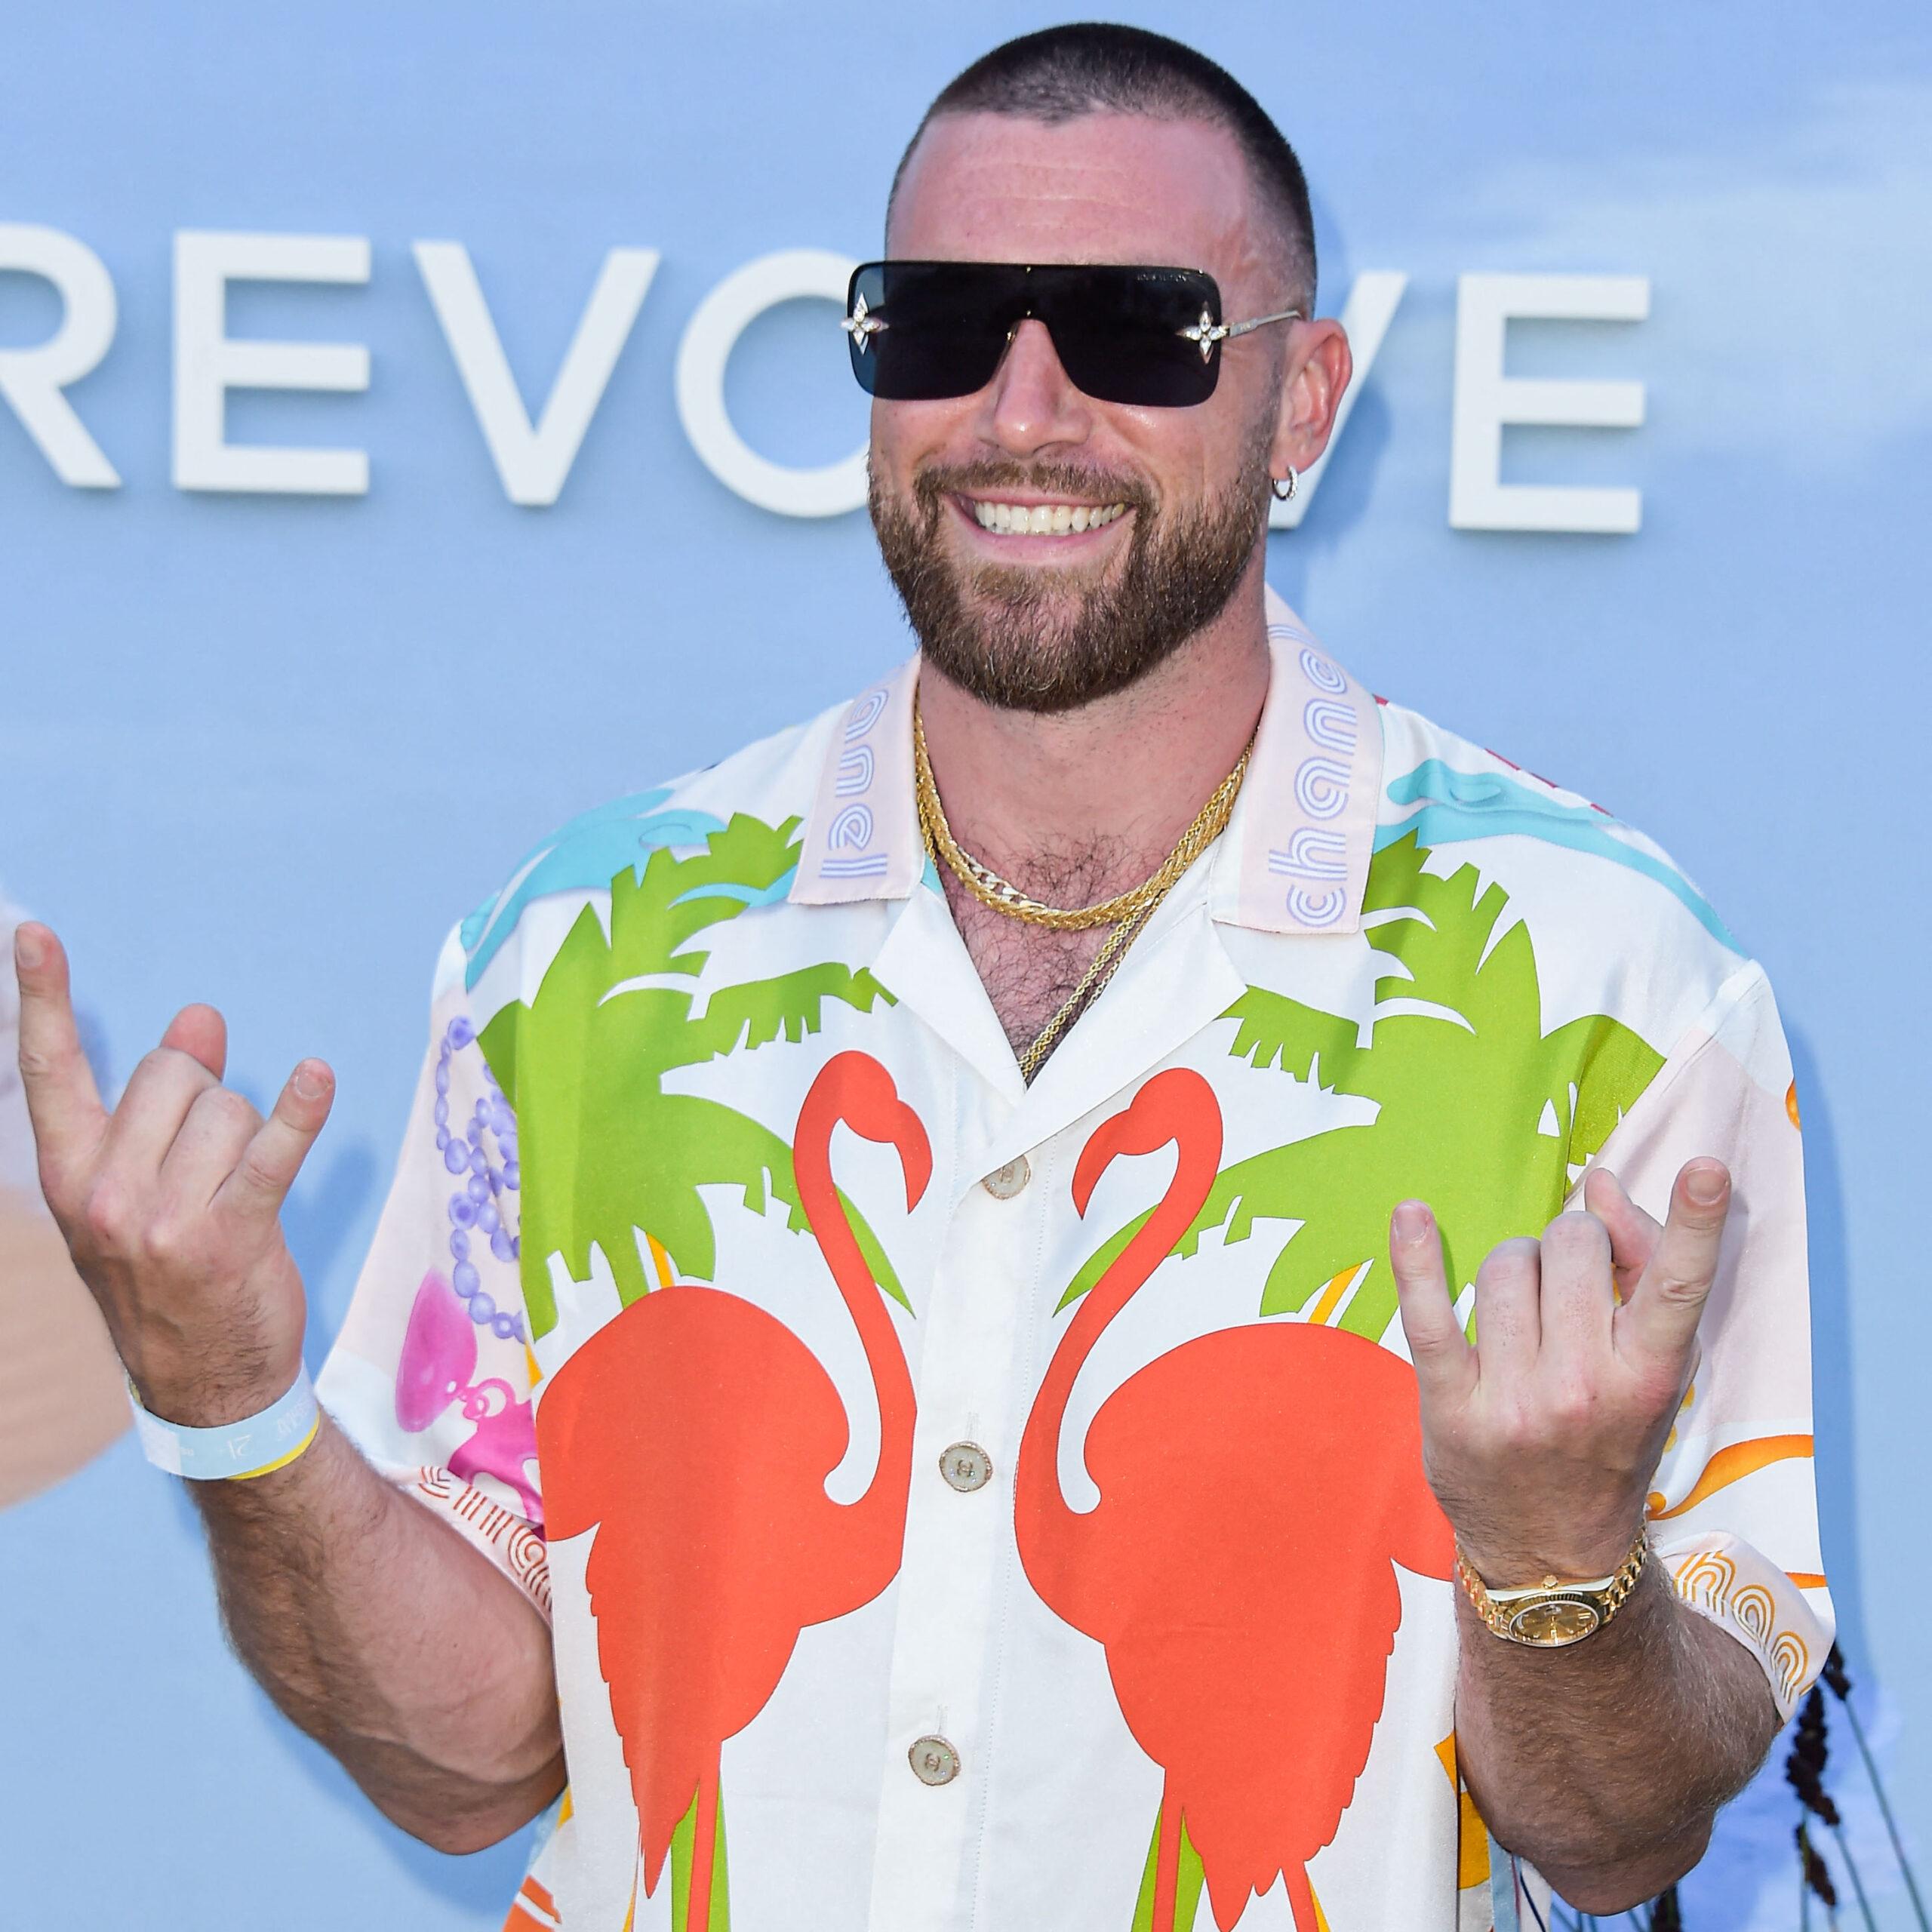 Travis Kelce smiling at Revolve event in sunglasses